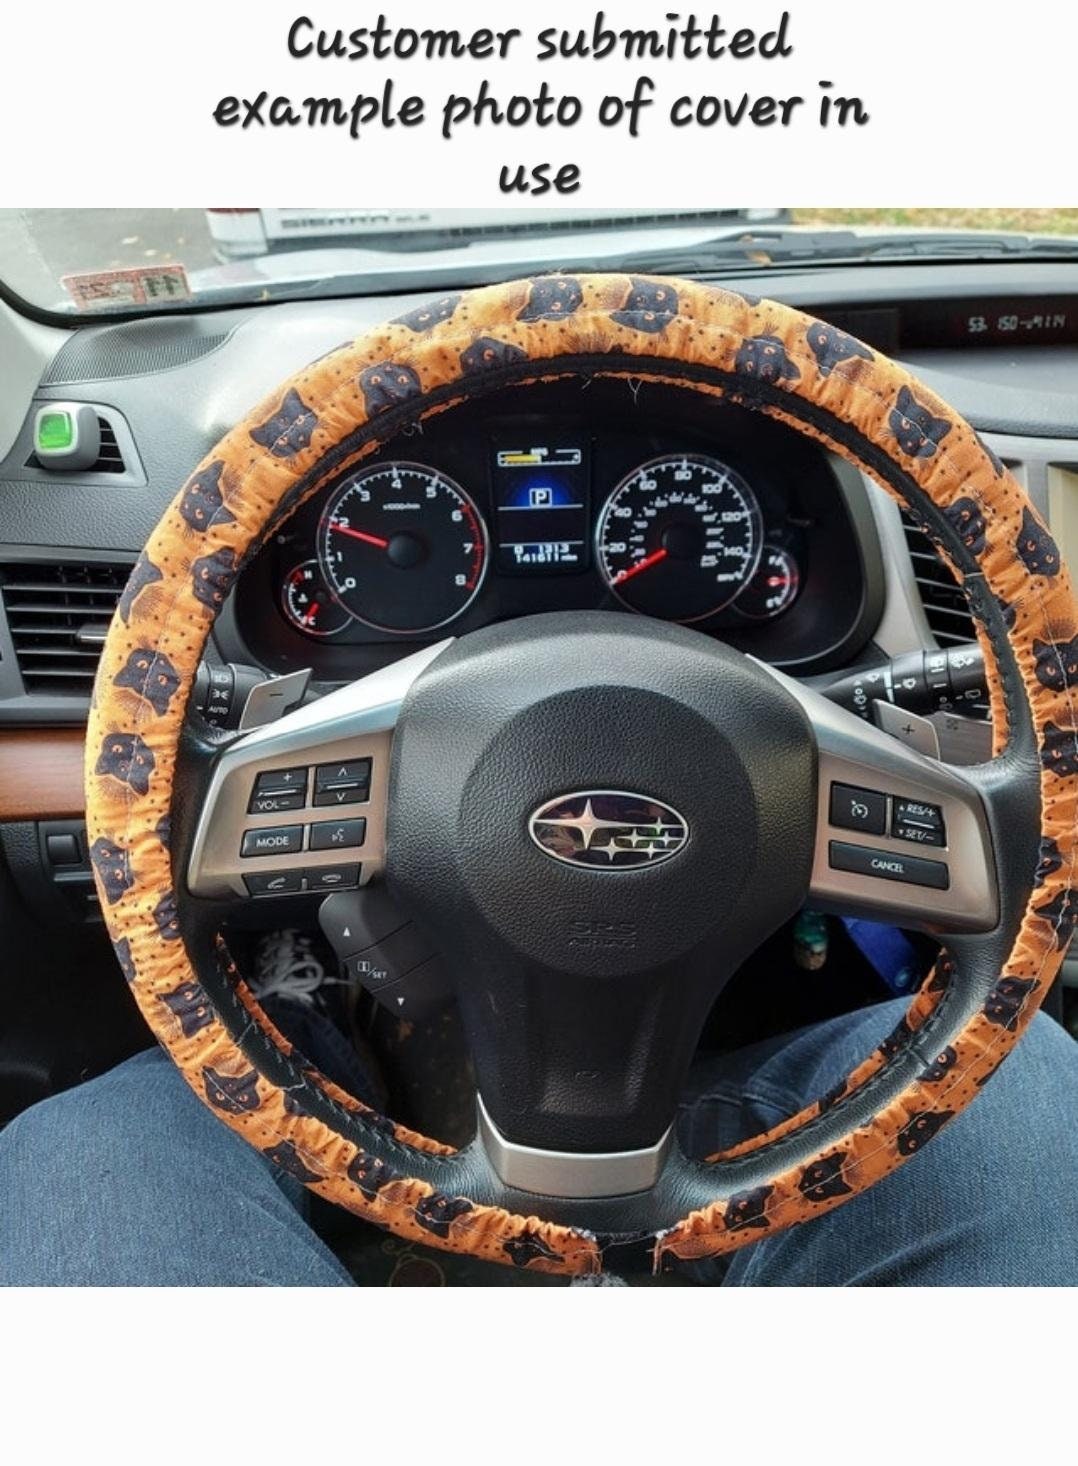 SW Steering Wheel Cover made with Licensed Disney Fabric - Harlow's Store and Garden Gifts